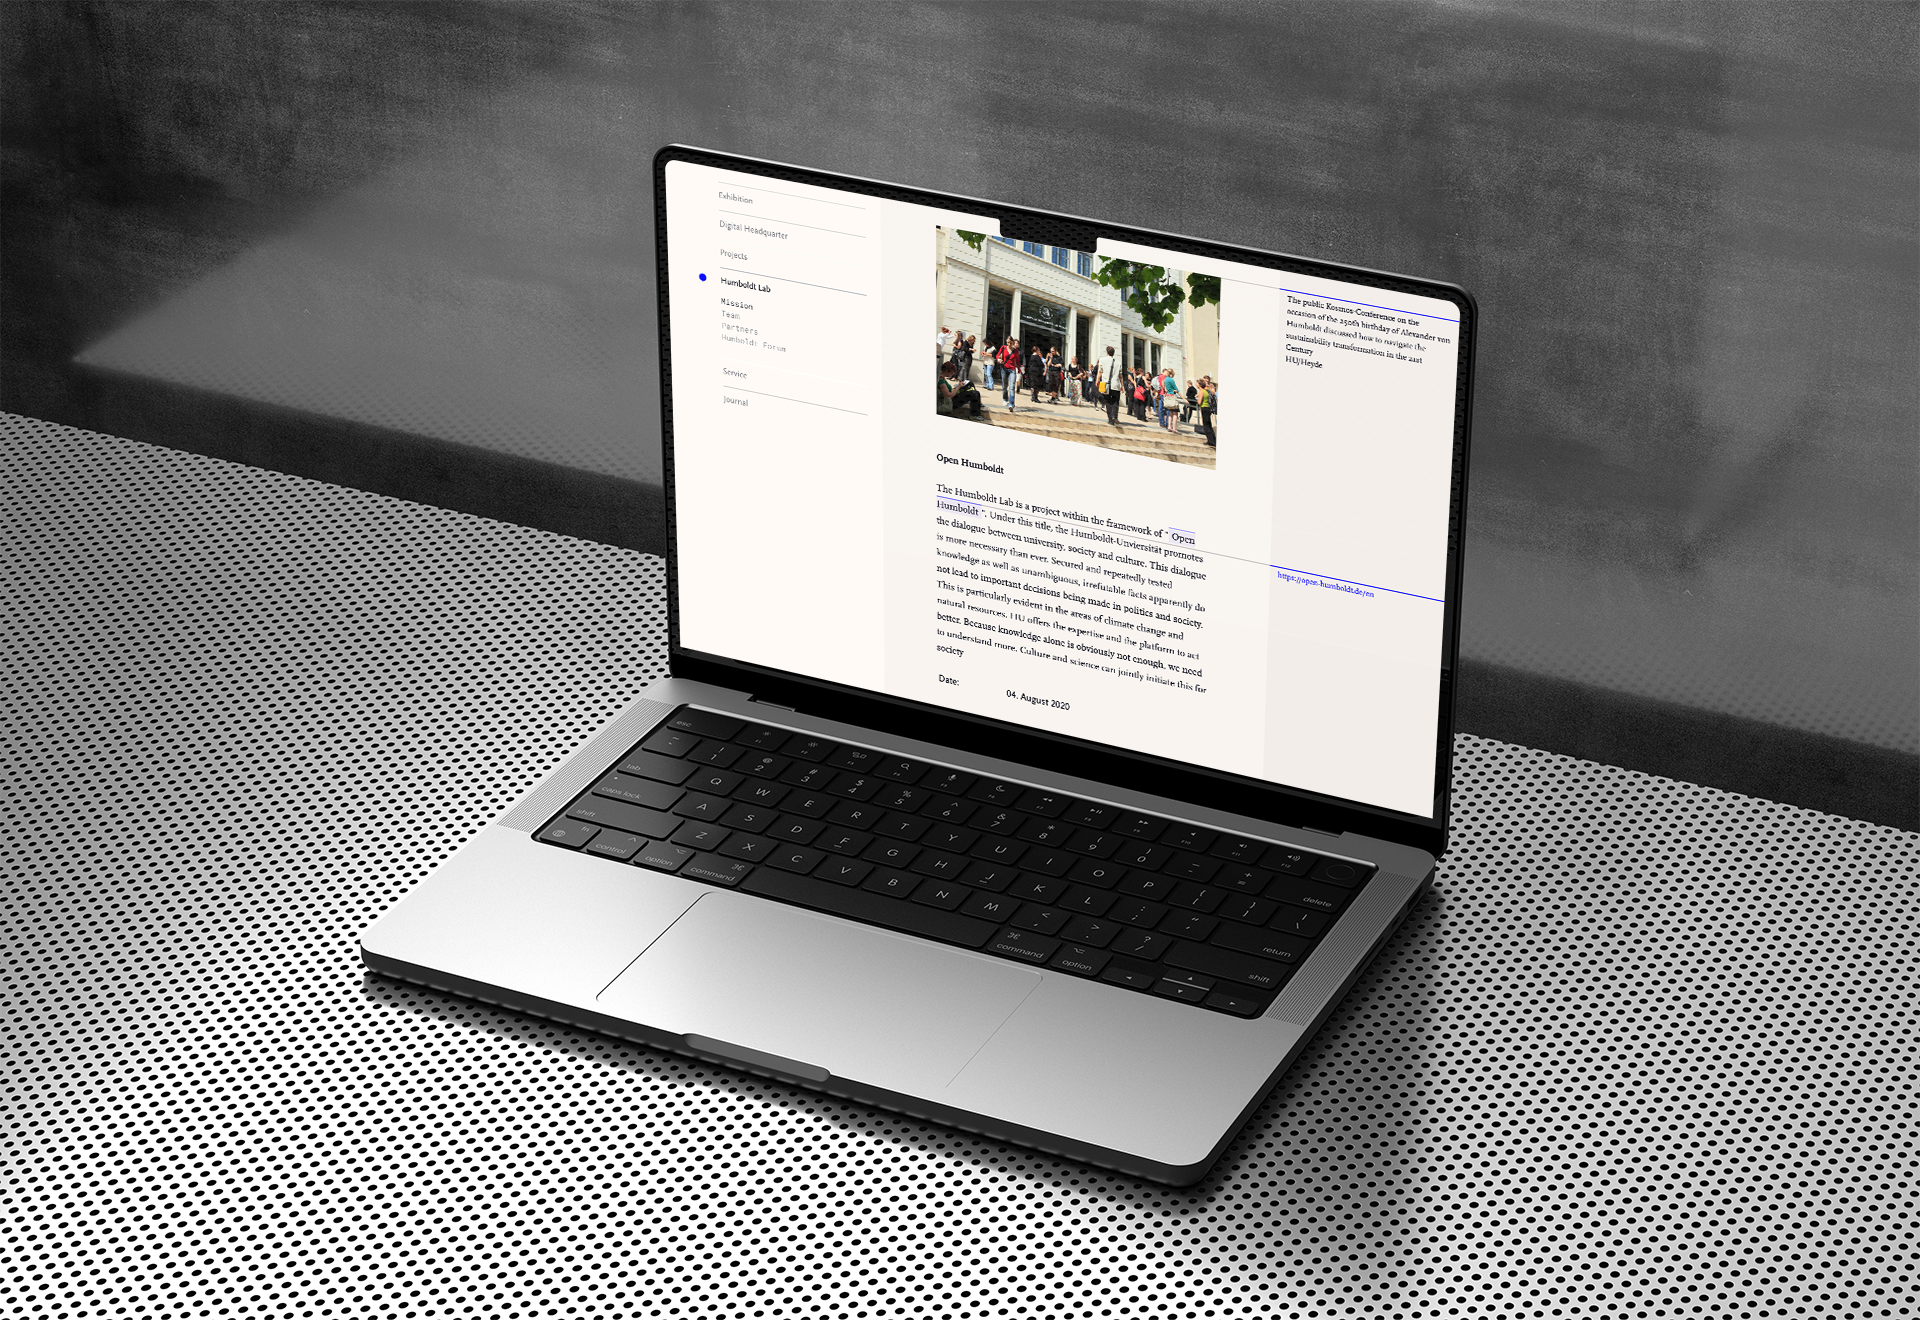 A mockup of a laptop in a cool metallic environment showing an article web page in a clean and elegant design. Menu on the left, text and images in the middle and a side bar with additional information.